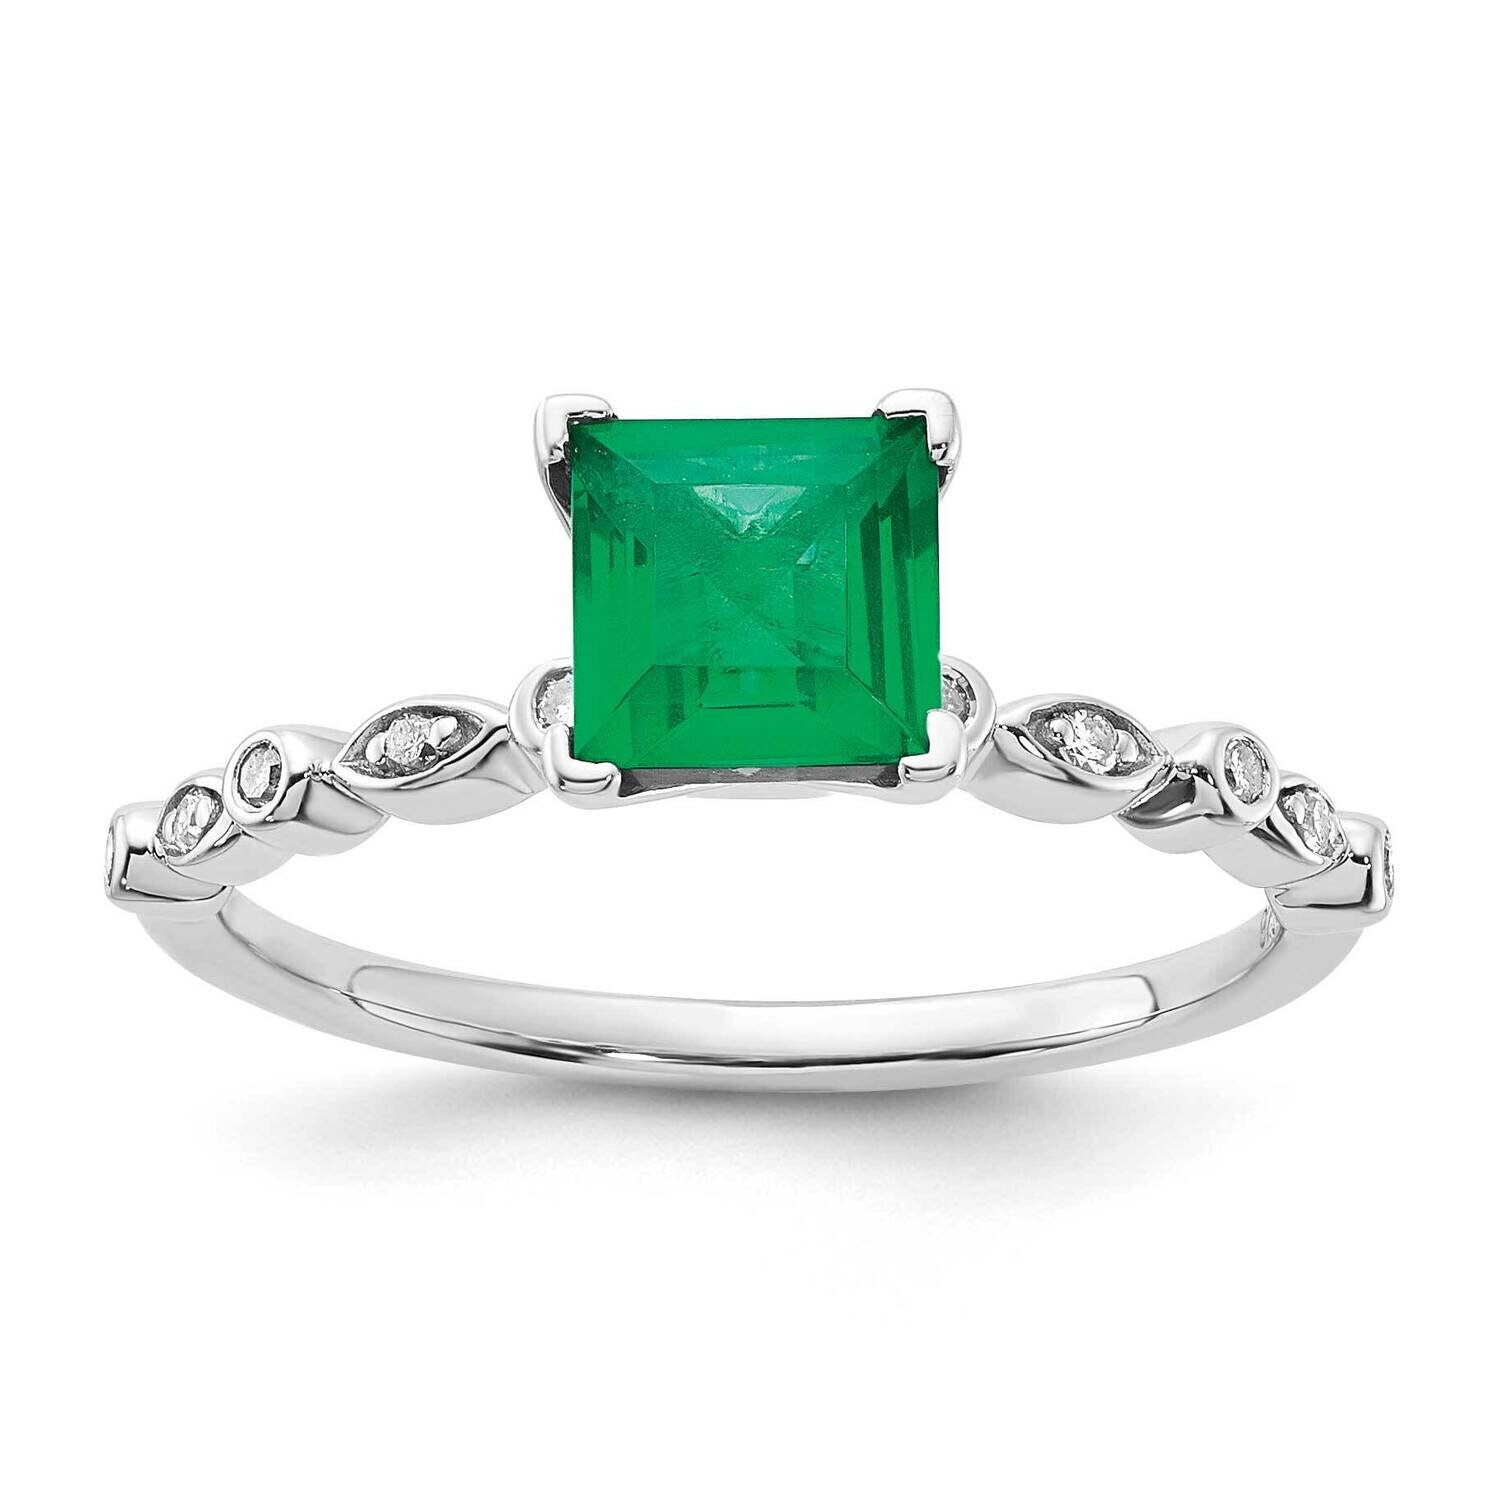 Sterling Silver Polished 6mm Cr Emerald and Diamond Ring RM3576-CE-SSAS43-7